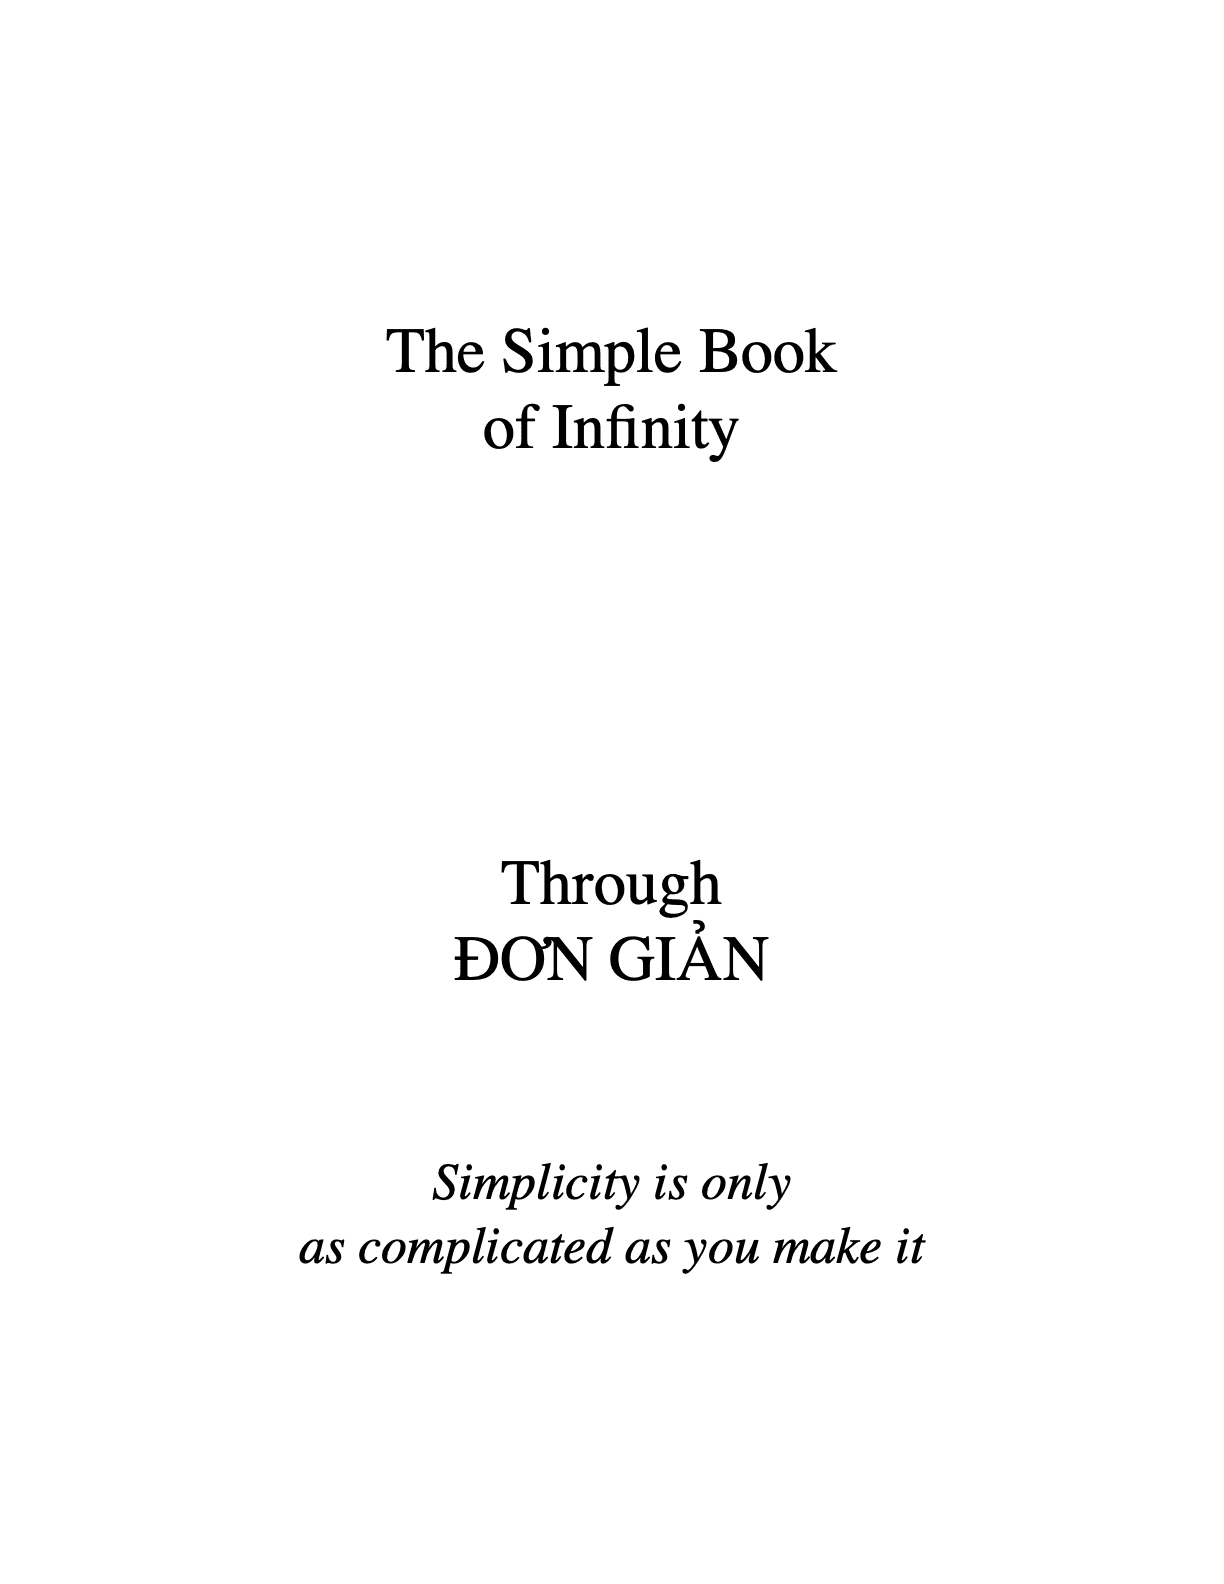 Book cover says: The Simple Book of Infinity, Through ĐƠN GIẢN, Simplicity is only as complicated as you make it